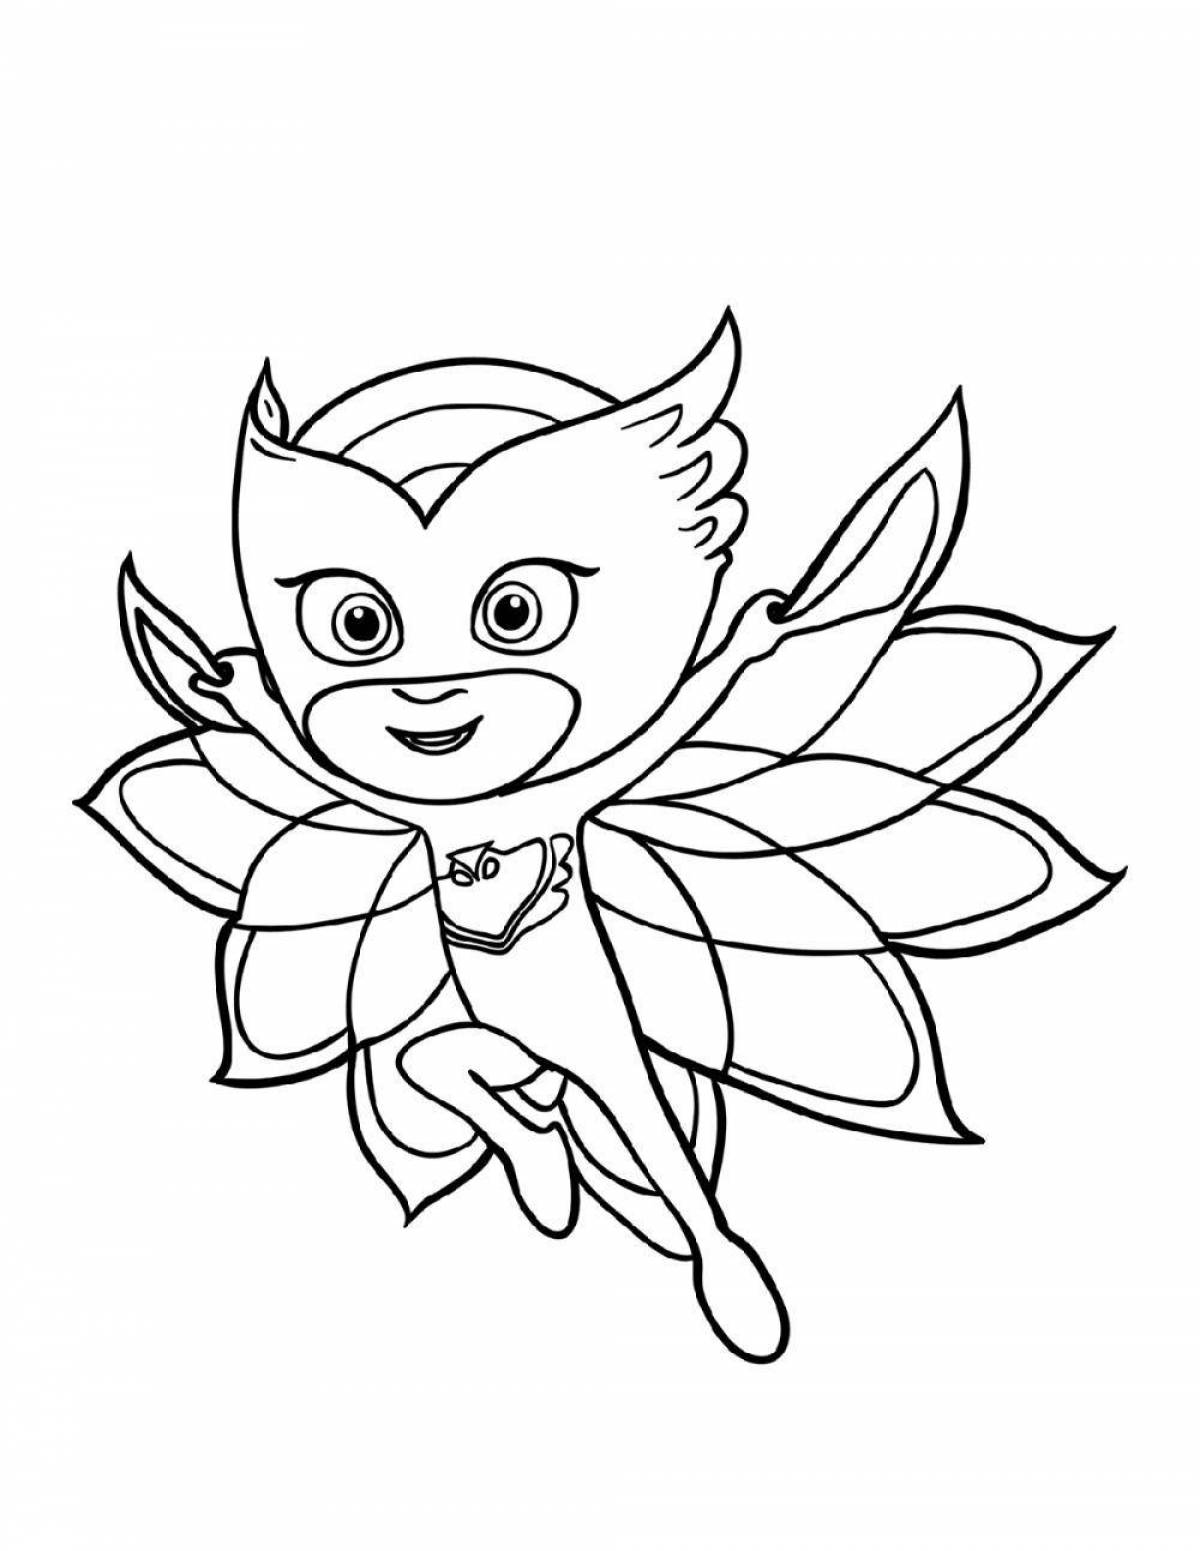 Dramatic coloring page pj